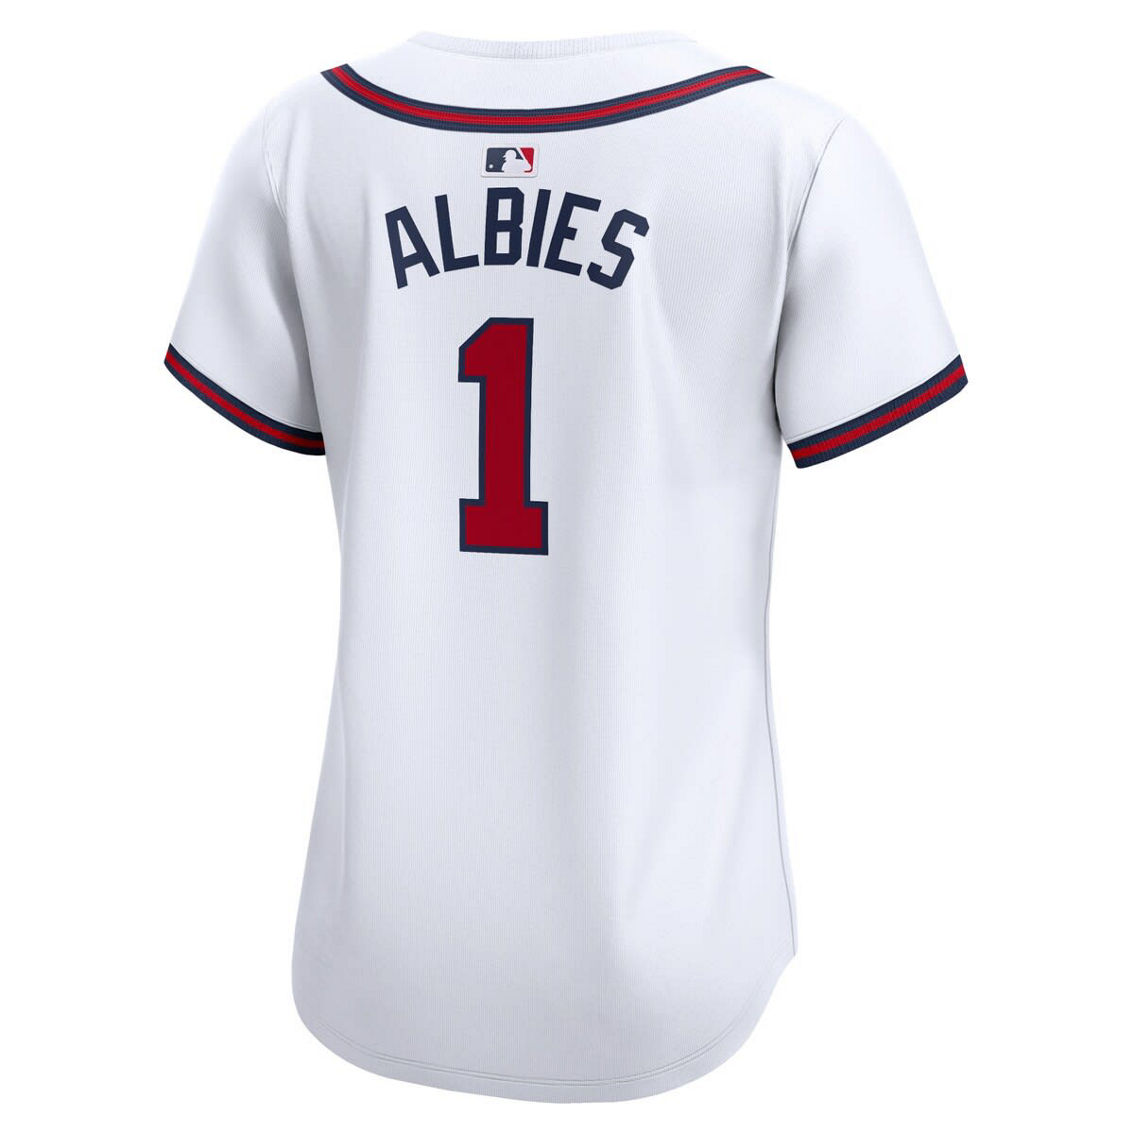 Nike Women's Ozzie Albies White Atlanta Braves Home Limited Player Jersey - Image 4 of 4